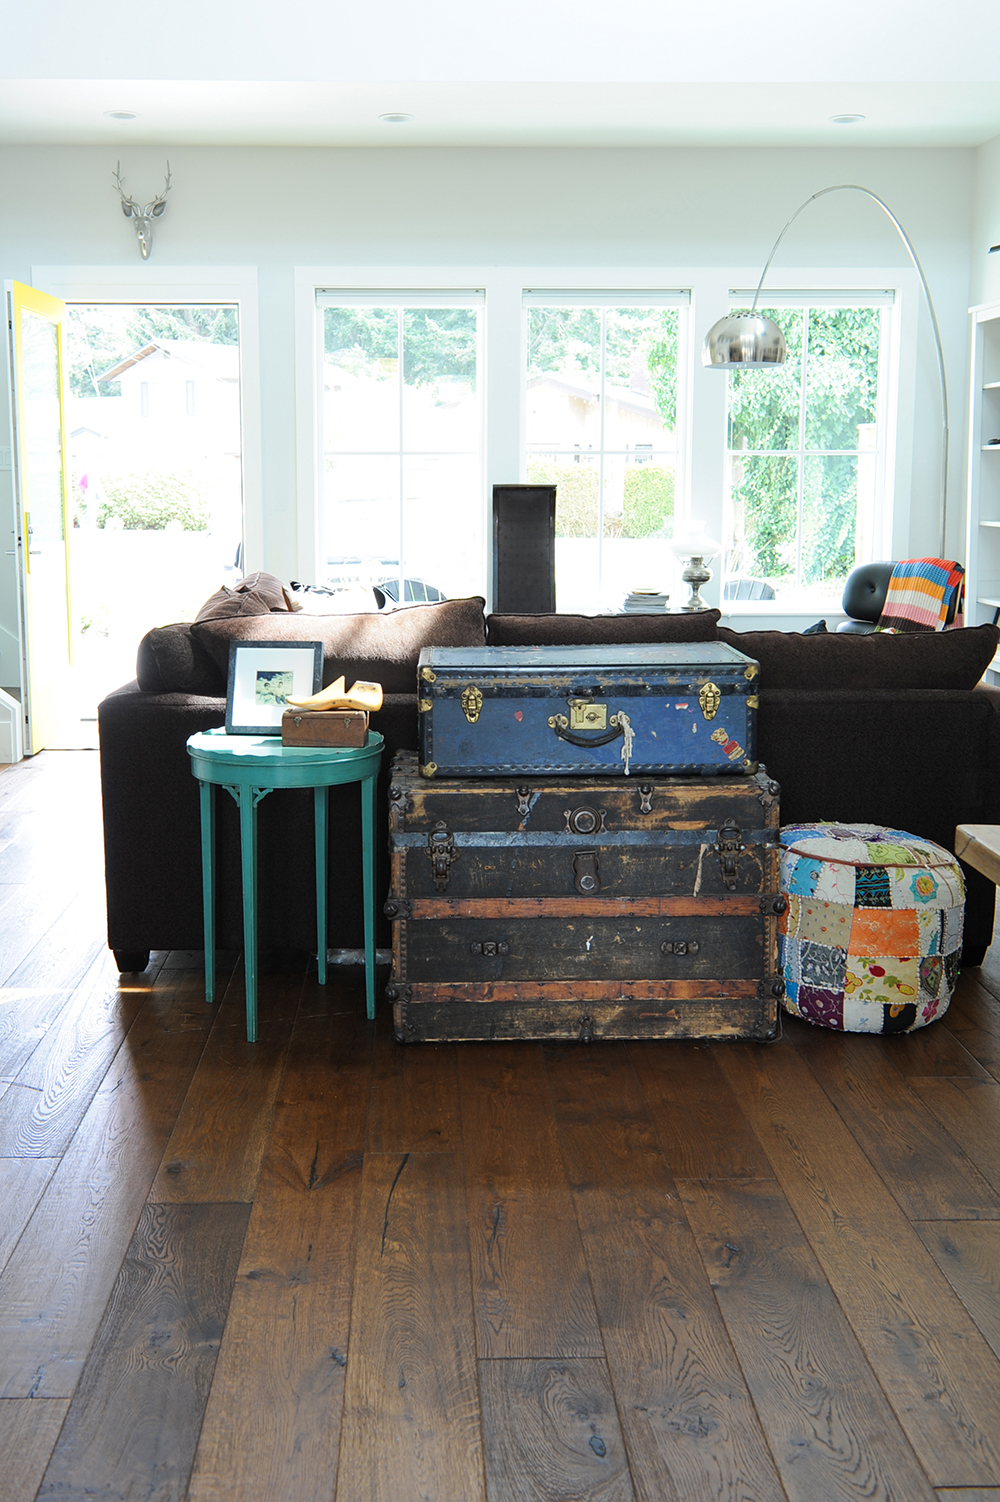 Furnishings with meaning, like these thrift-shop trunks, are layered throughout the space.